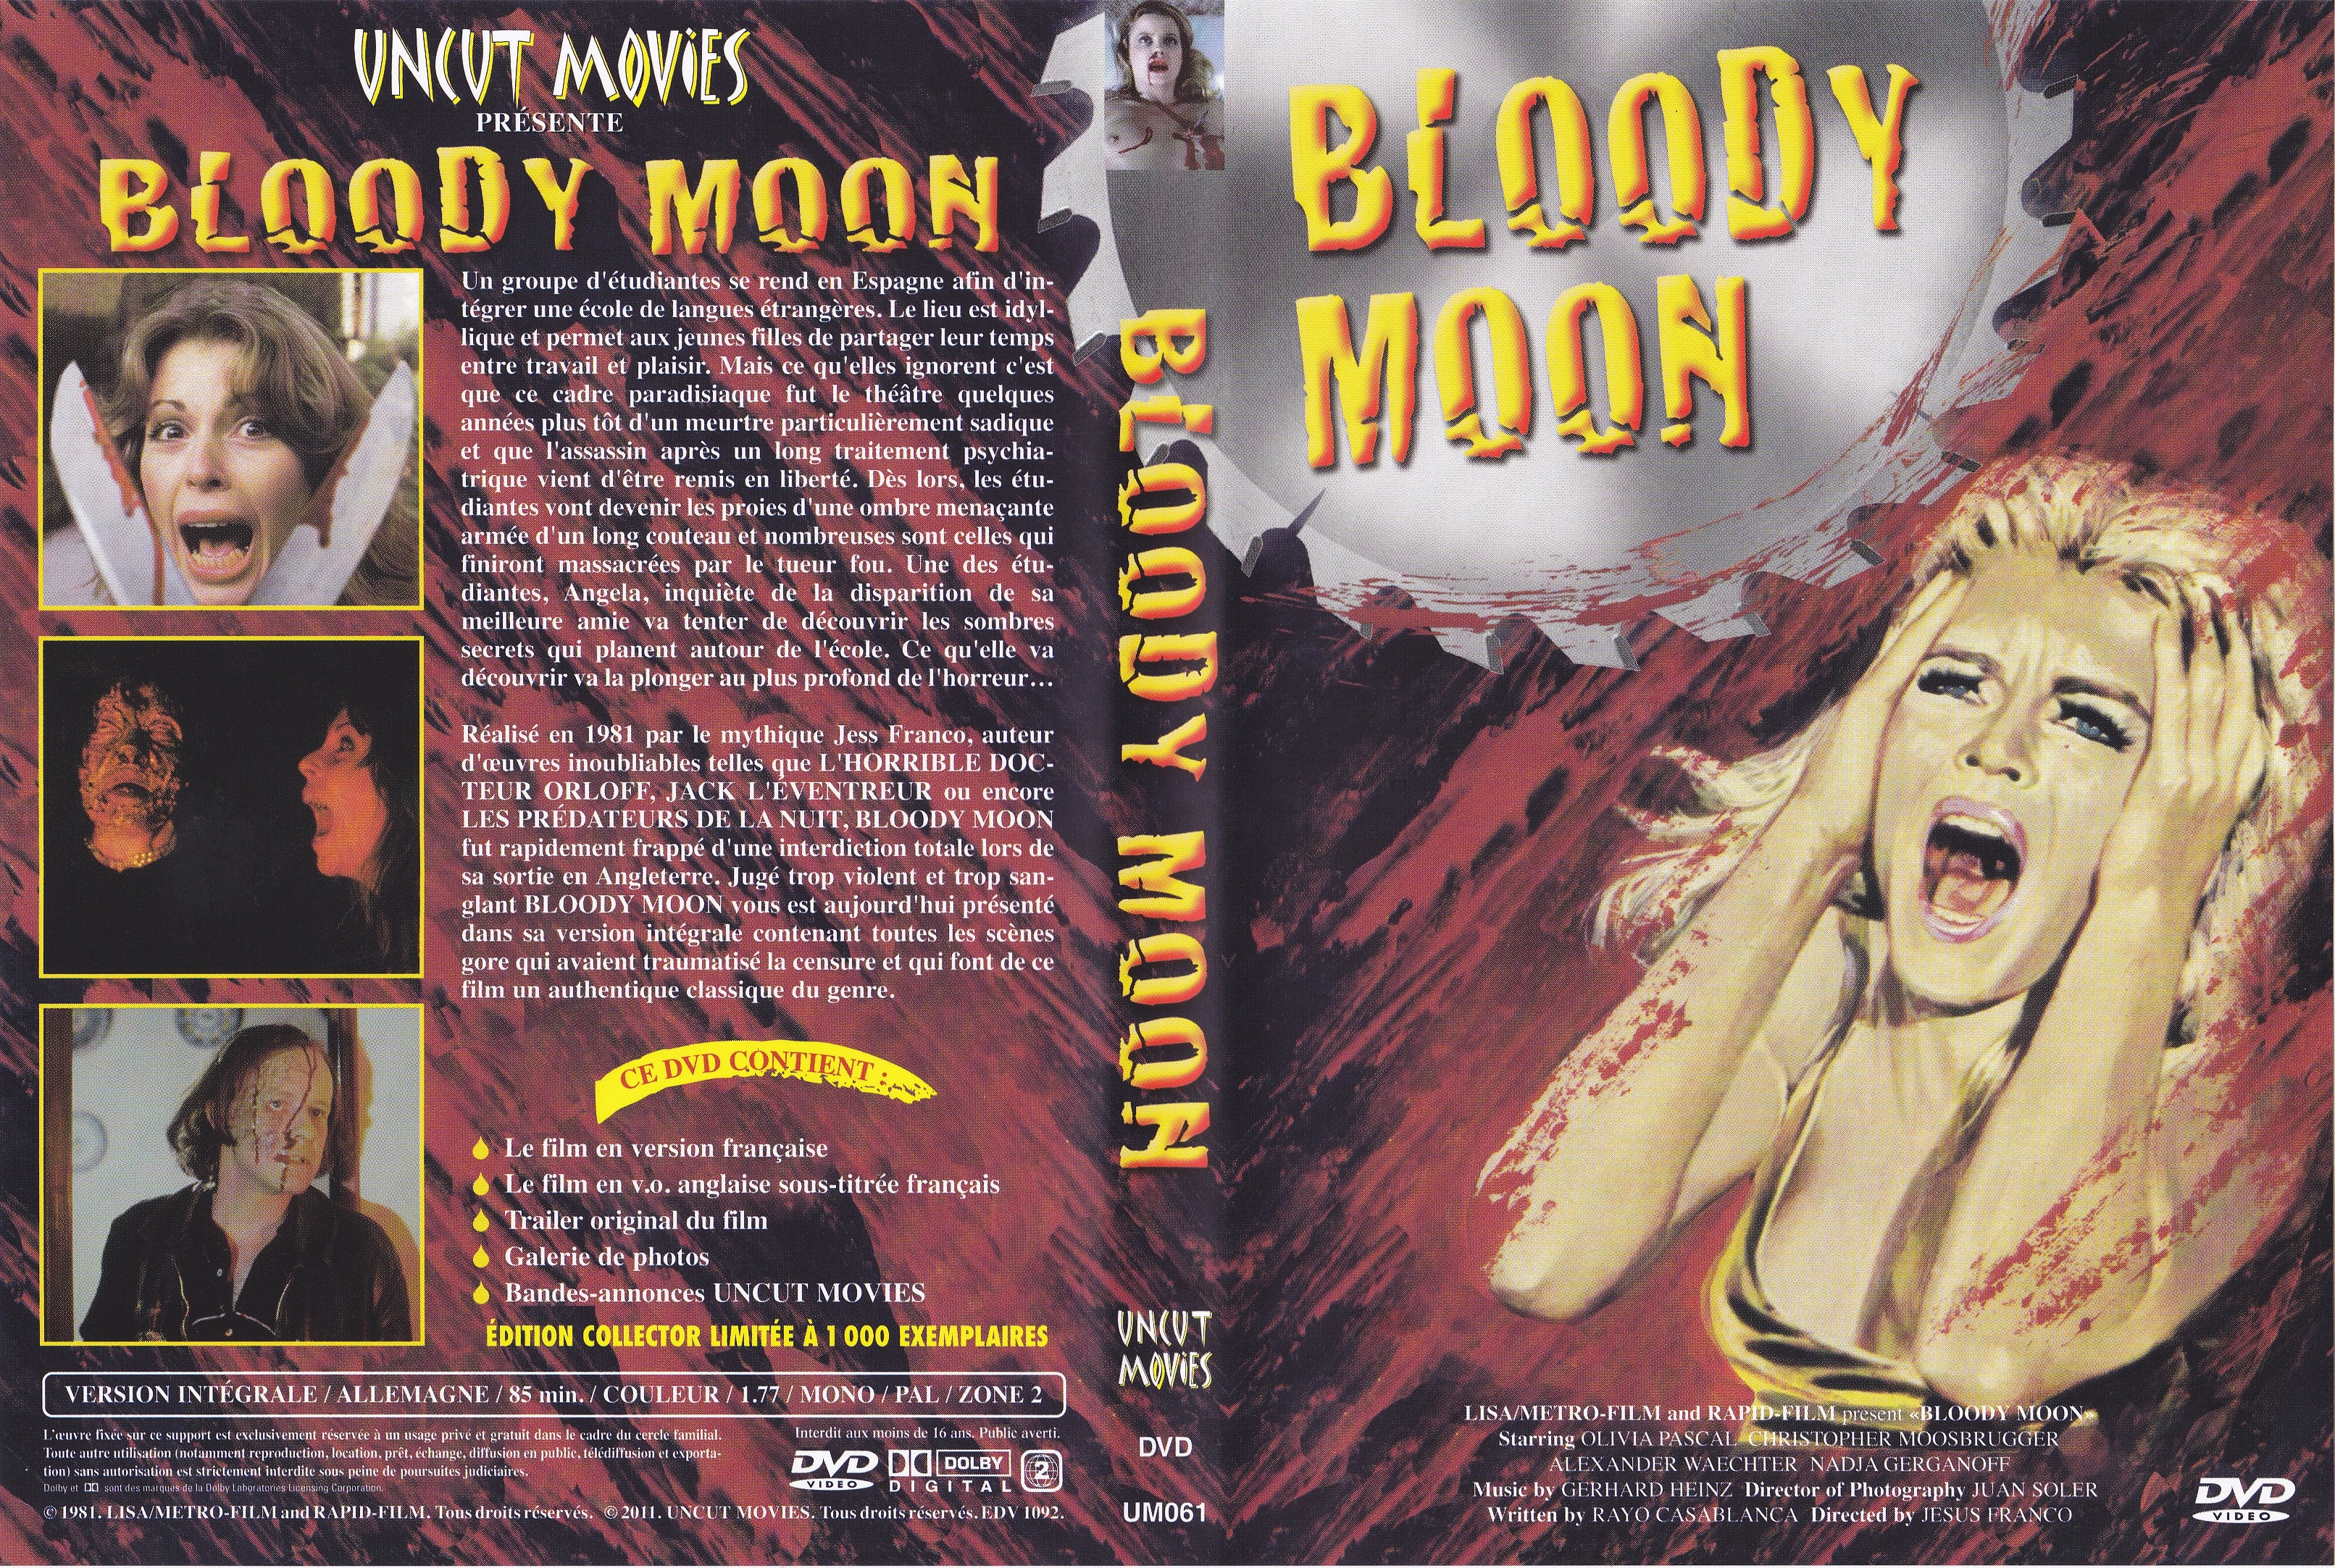 Jaquette DVD Bloody Moon